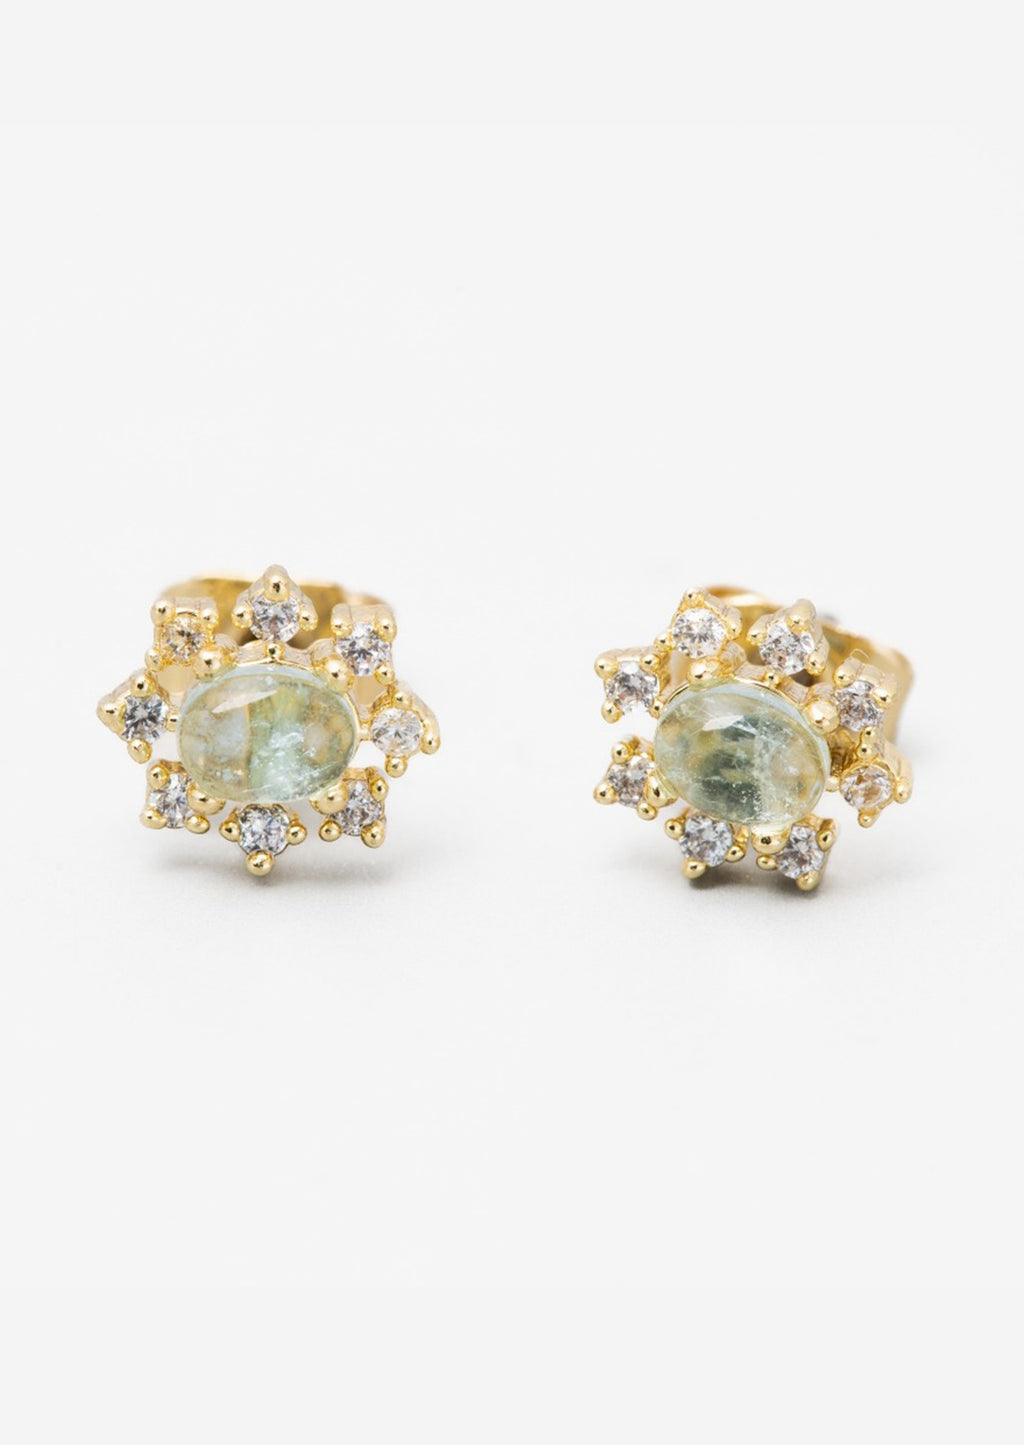 1: A pair of aquamarine and clear crystal gold stud earrings in sun shape.